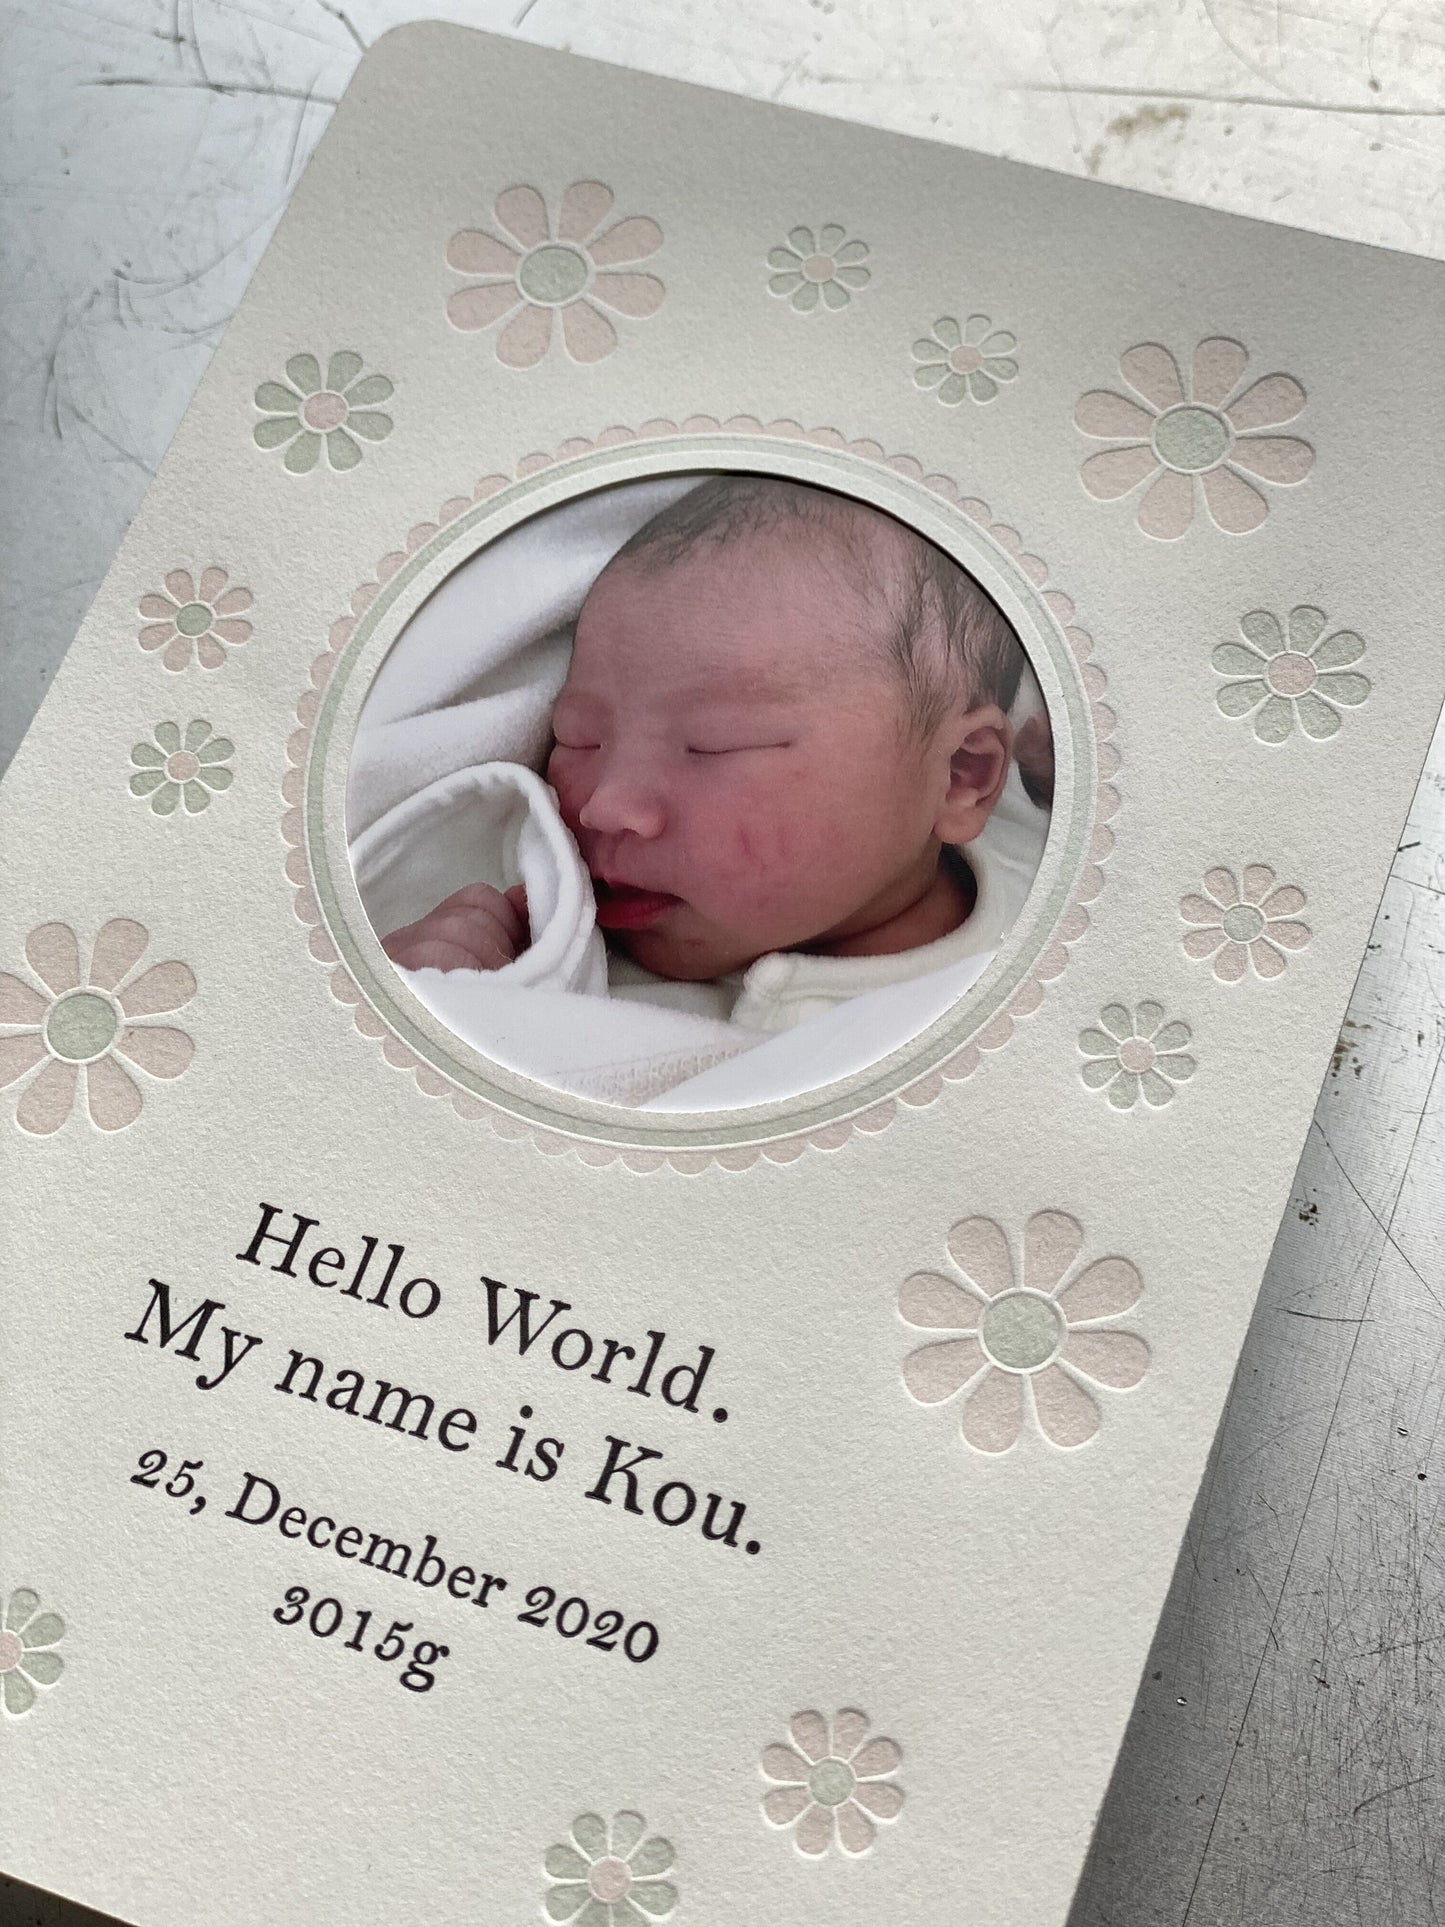 BABY CARD